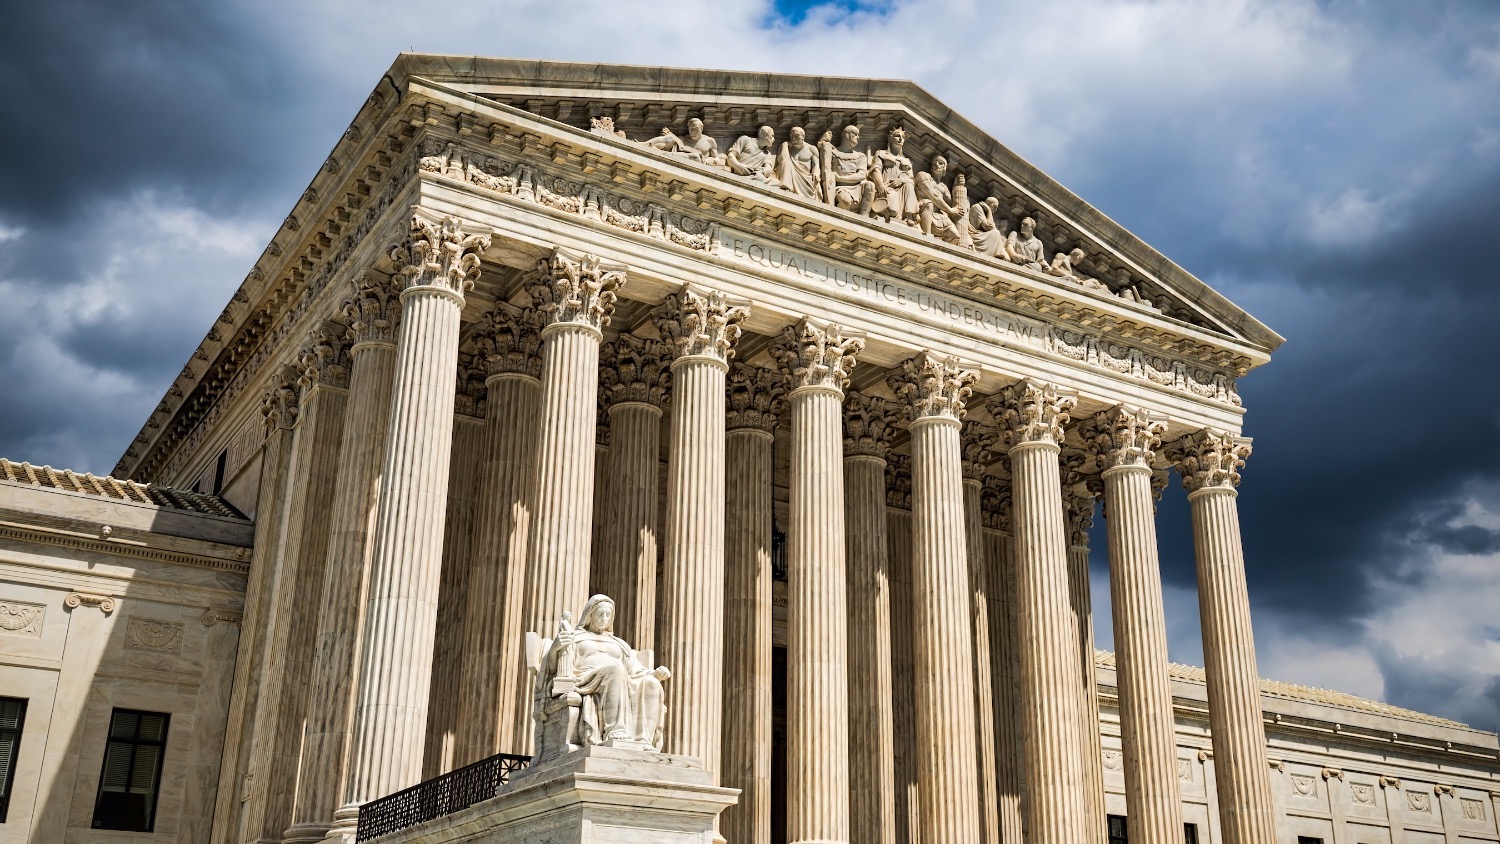 The front of the US Supreme Court building in Washington, DC. - What the Supreme Court's EPA Ruling Means for Climate Action - College of Natural Resources News NC State University